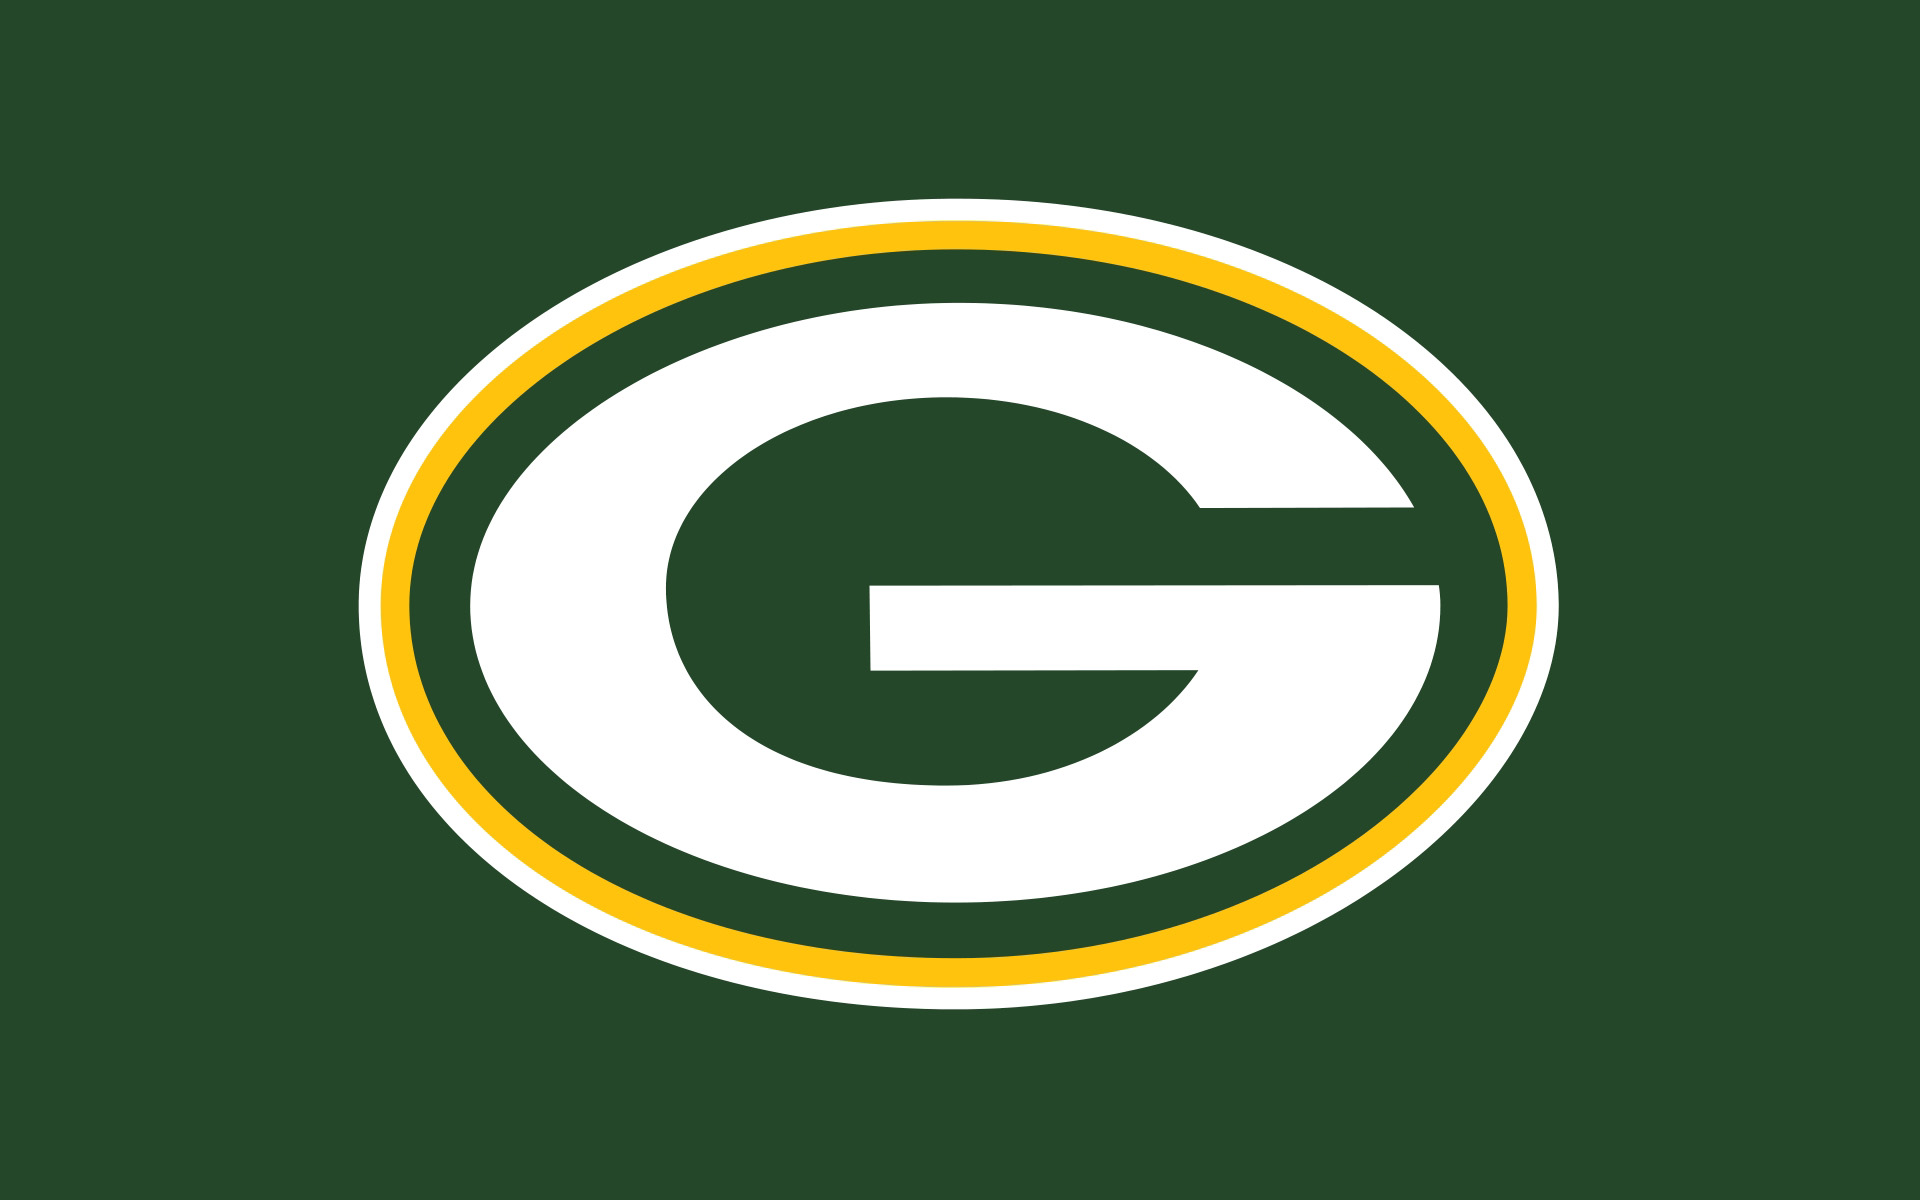 Wallpaper Packers Green Background Image